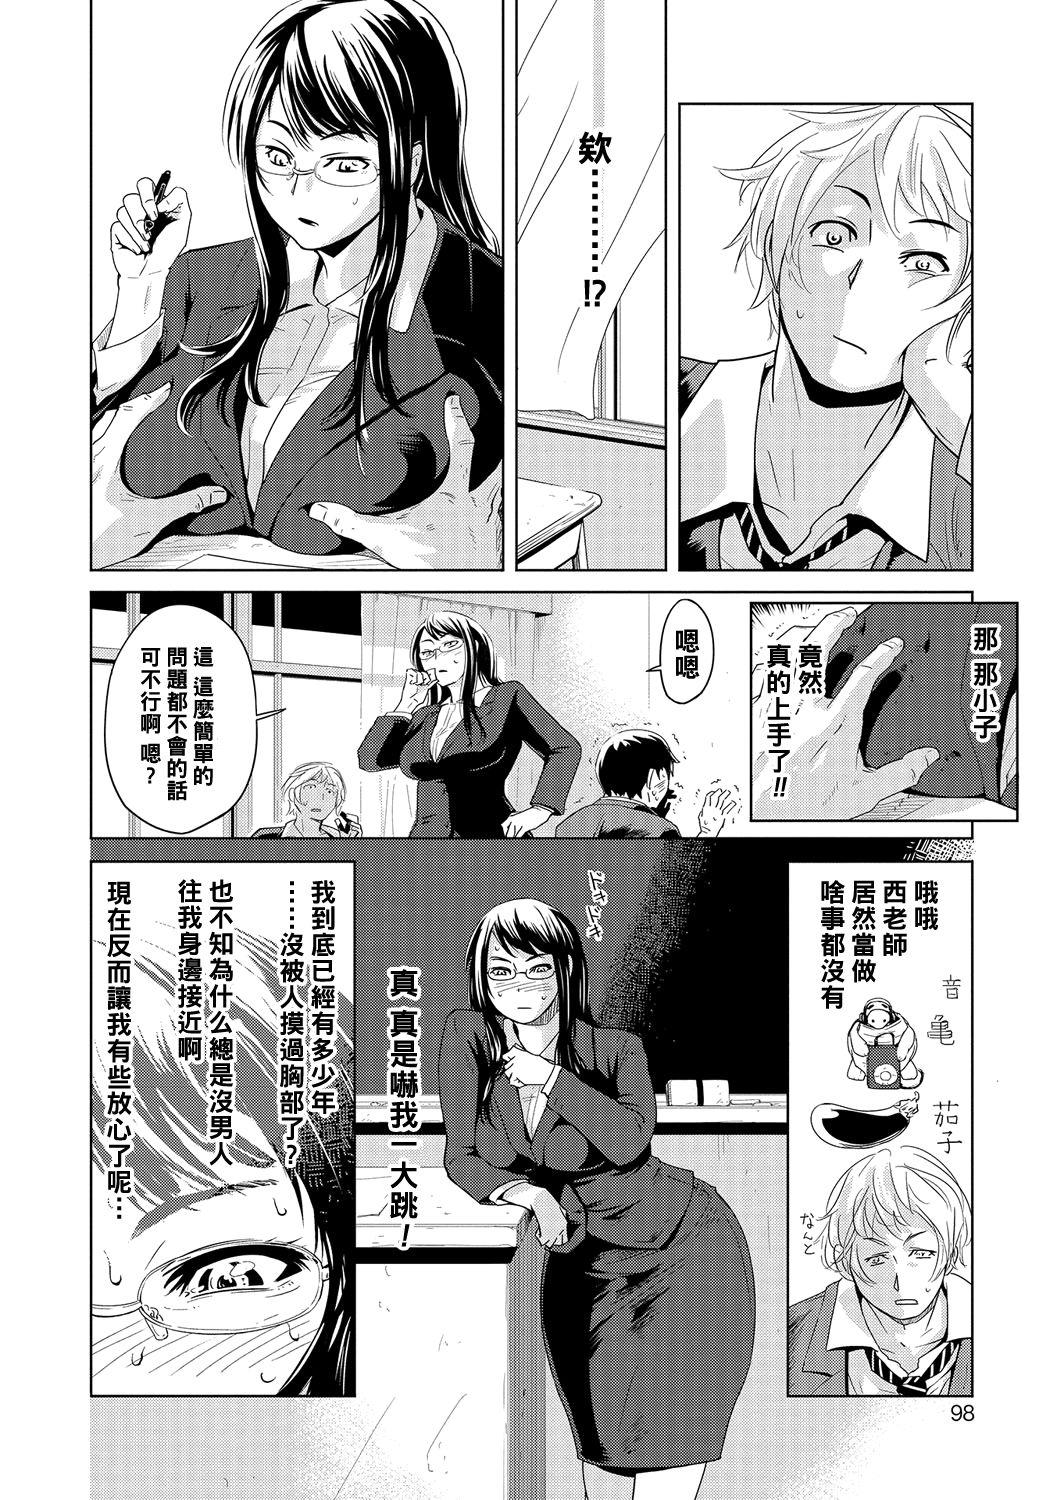 Ano 補習戦略～西彩子先生の場合～（Chinese） Socks - Page 4